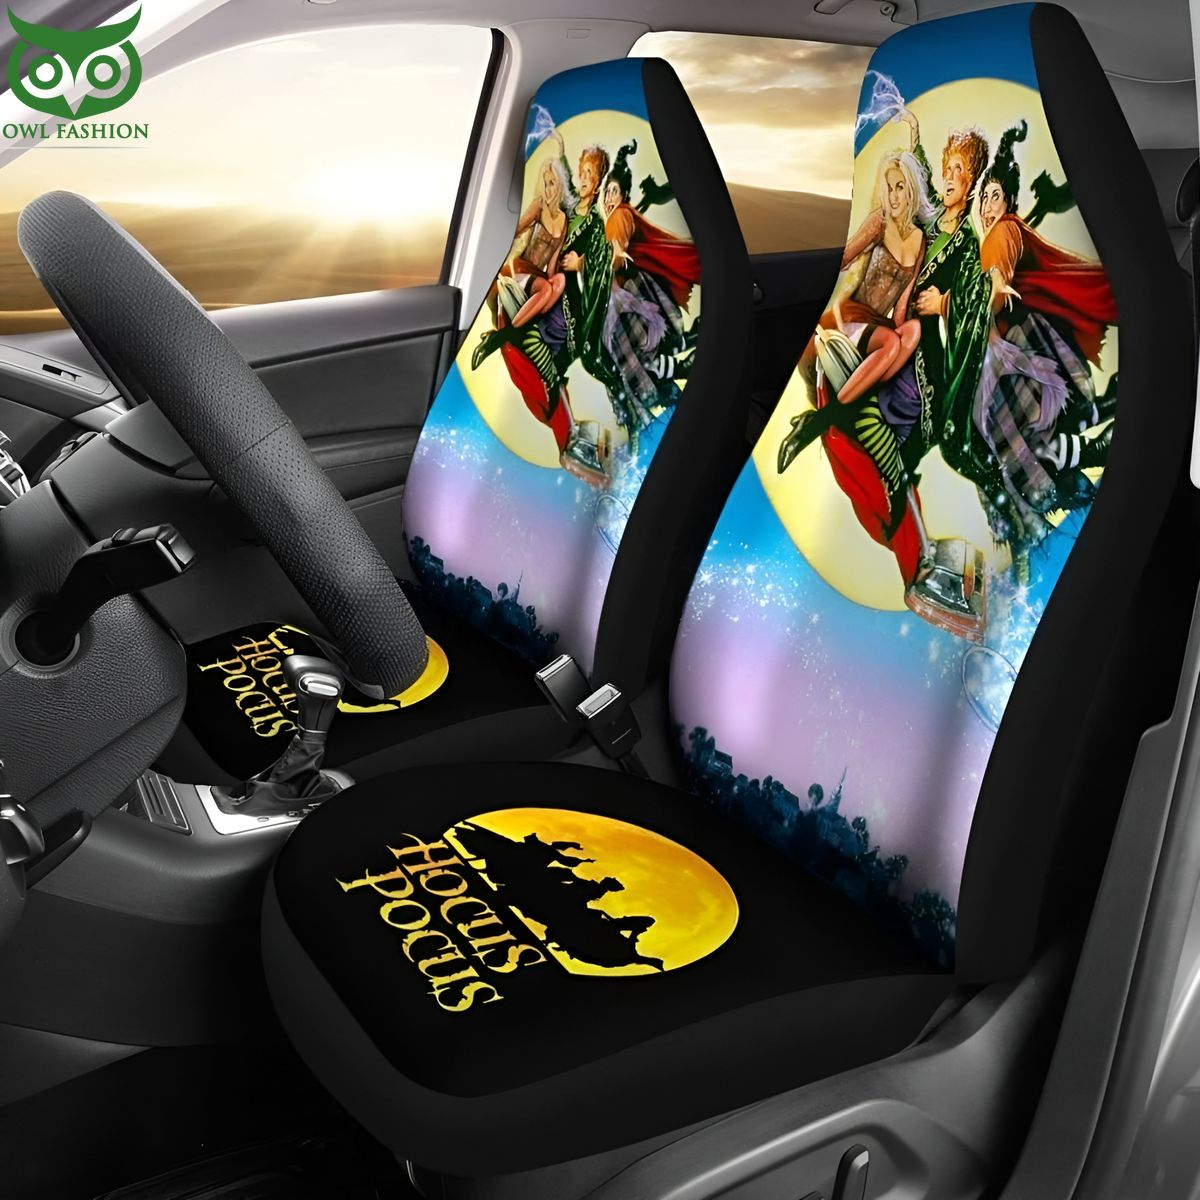 Hocus Pocus Flying Car Seat Cover You are always amazing